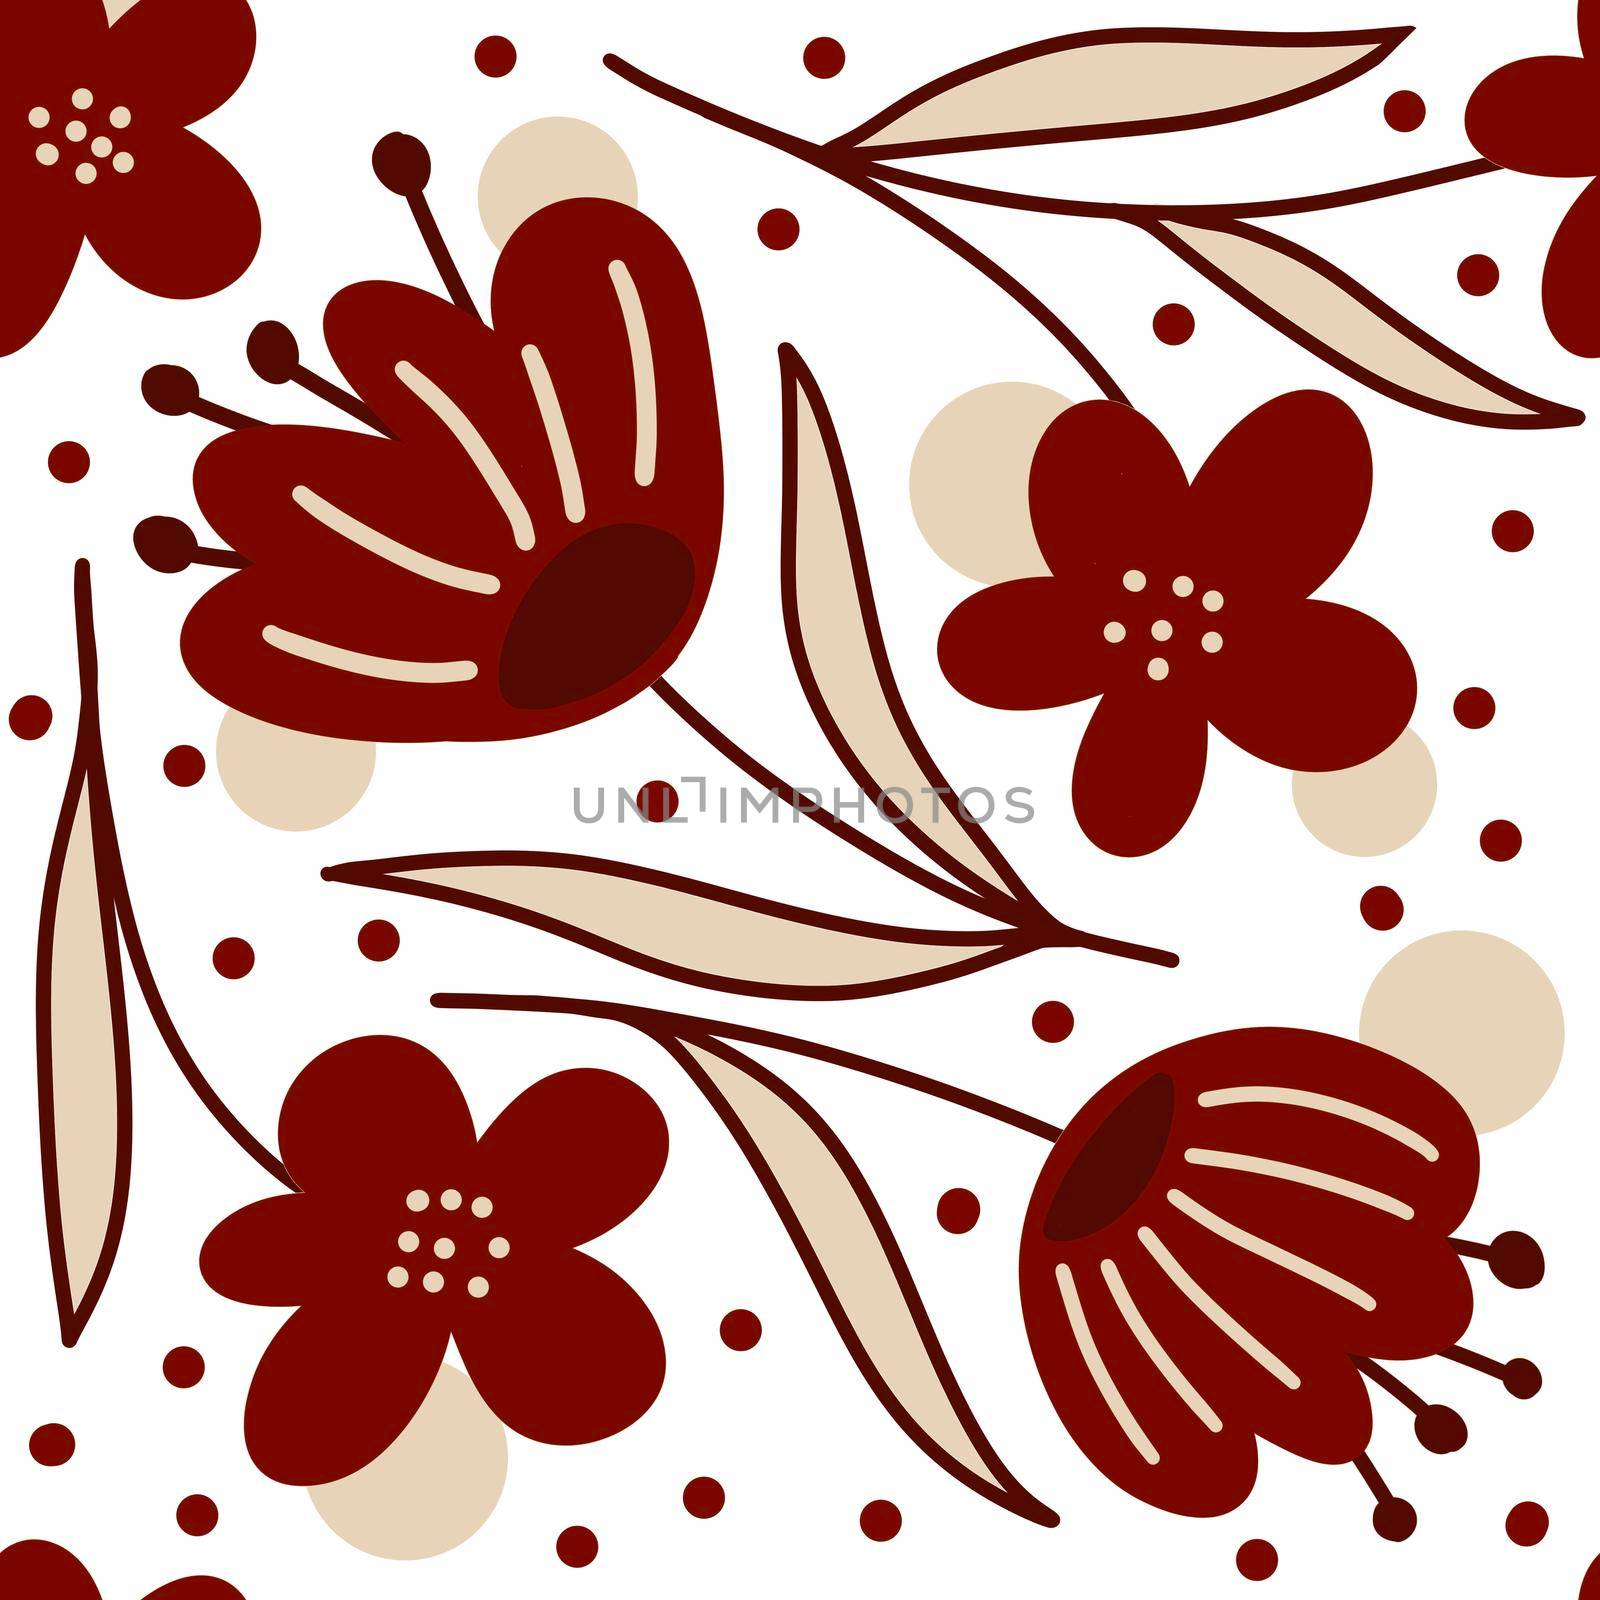 Hand drawn seamless floral pattern with burgundy marsala flowers on neutral beige background. Elegant red black white leaves petals blossom for textile wrapping paper. Summer fall autumn wedding in minimalist style. by Lagmar